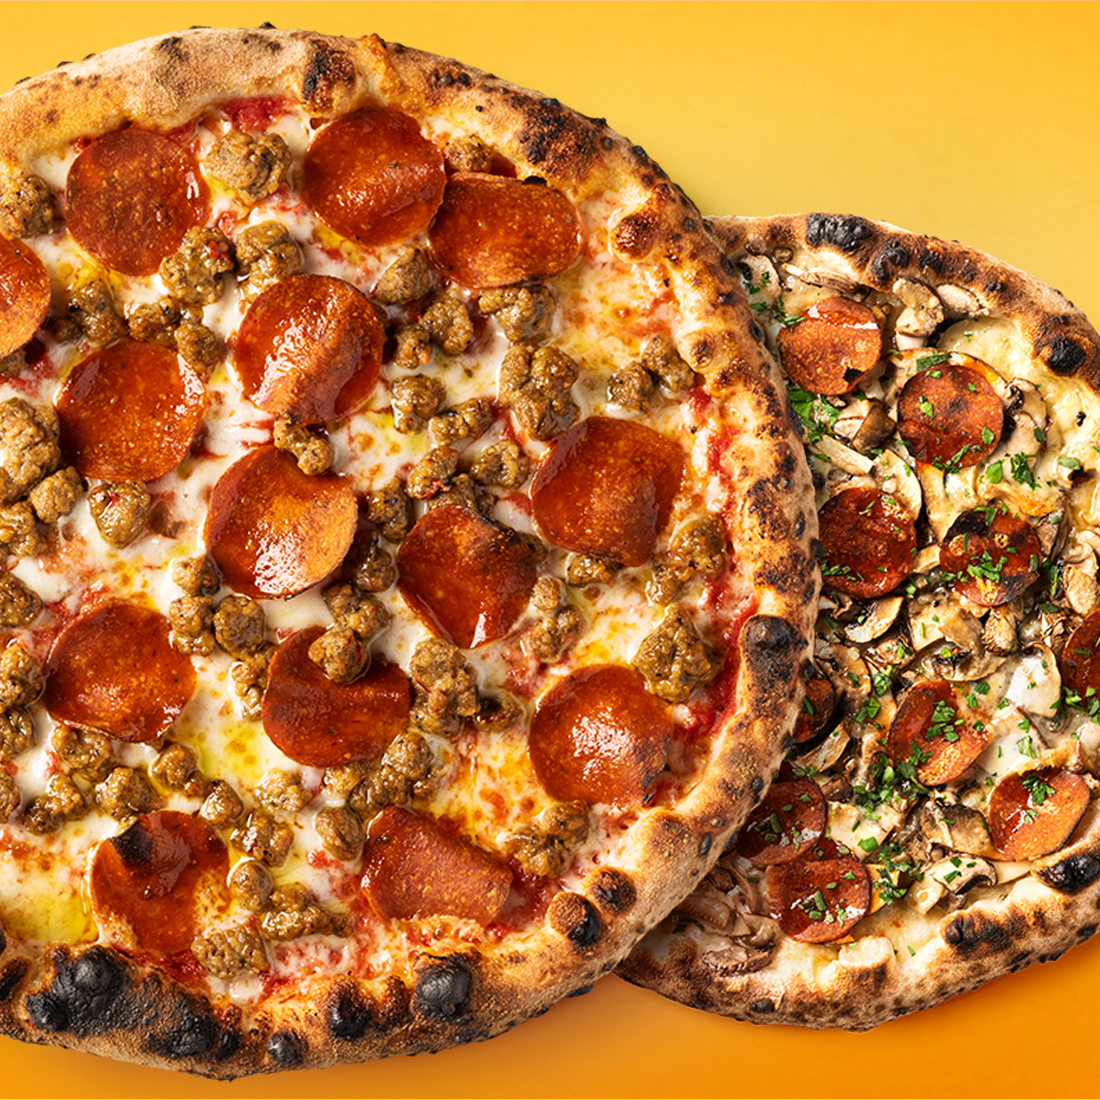 Two whole pizzas with varying plant-based toppings on an orange gradient background